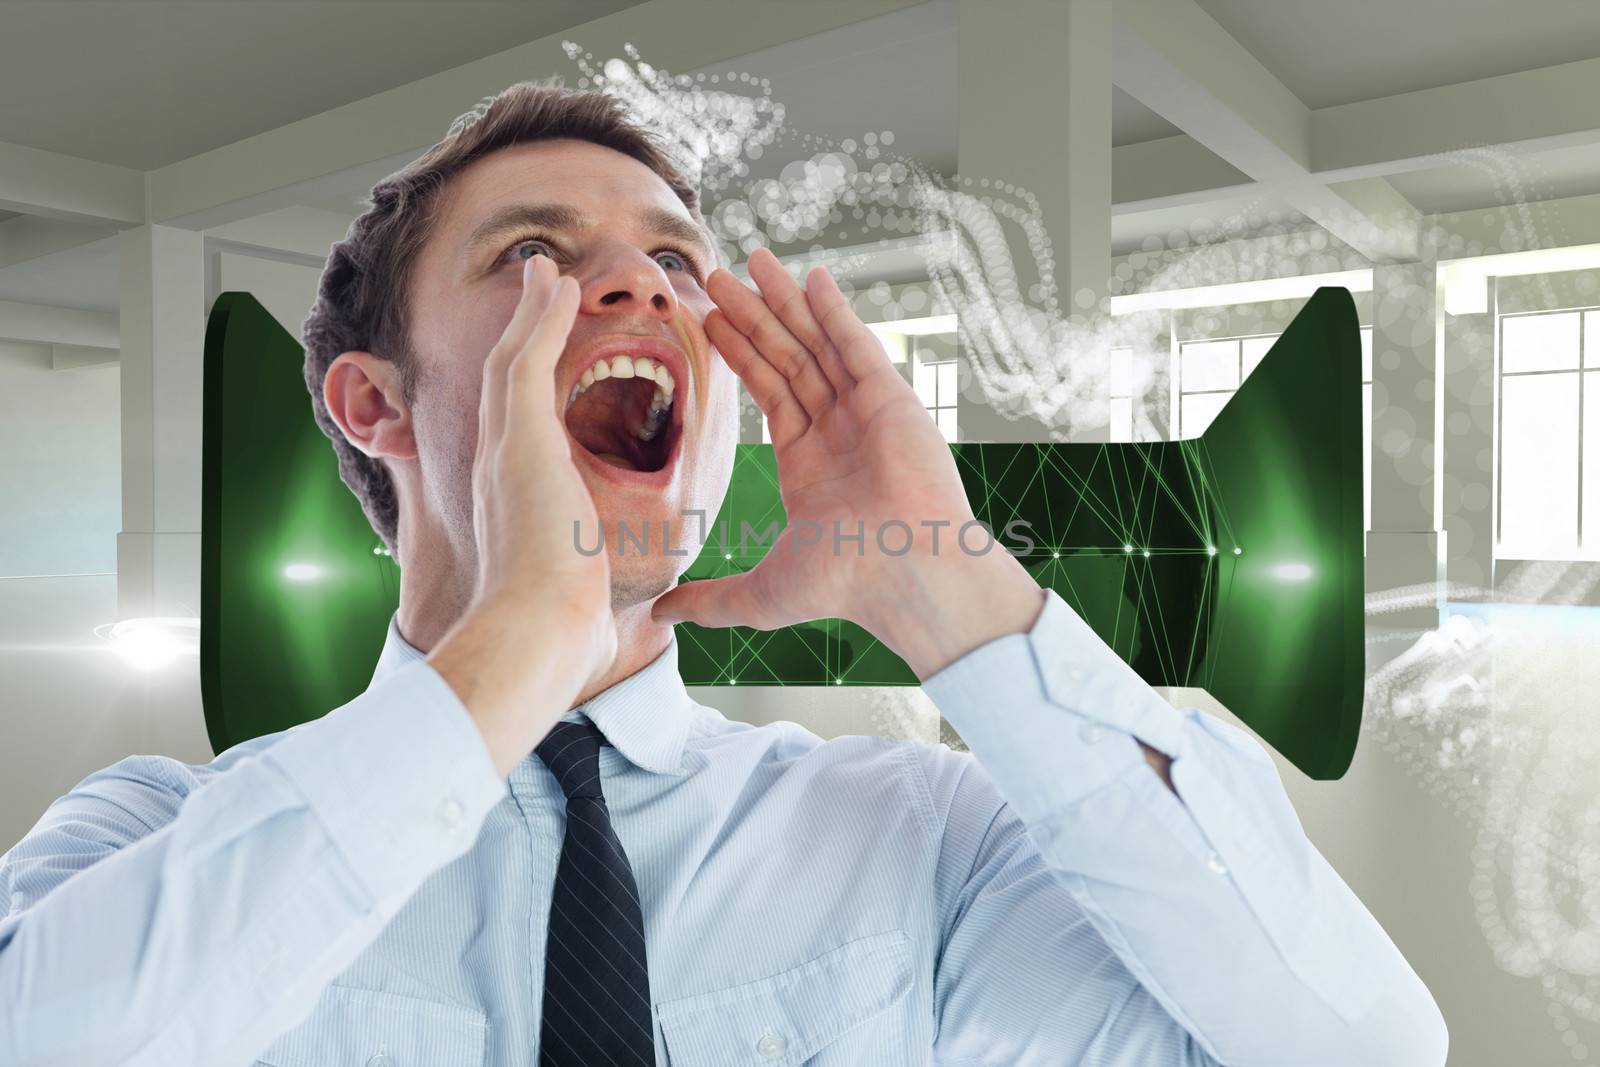 Businessman shouting against abstract white design in room